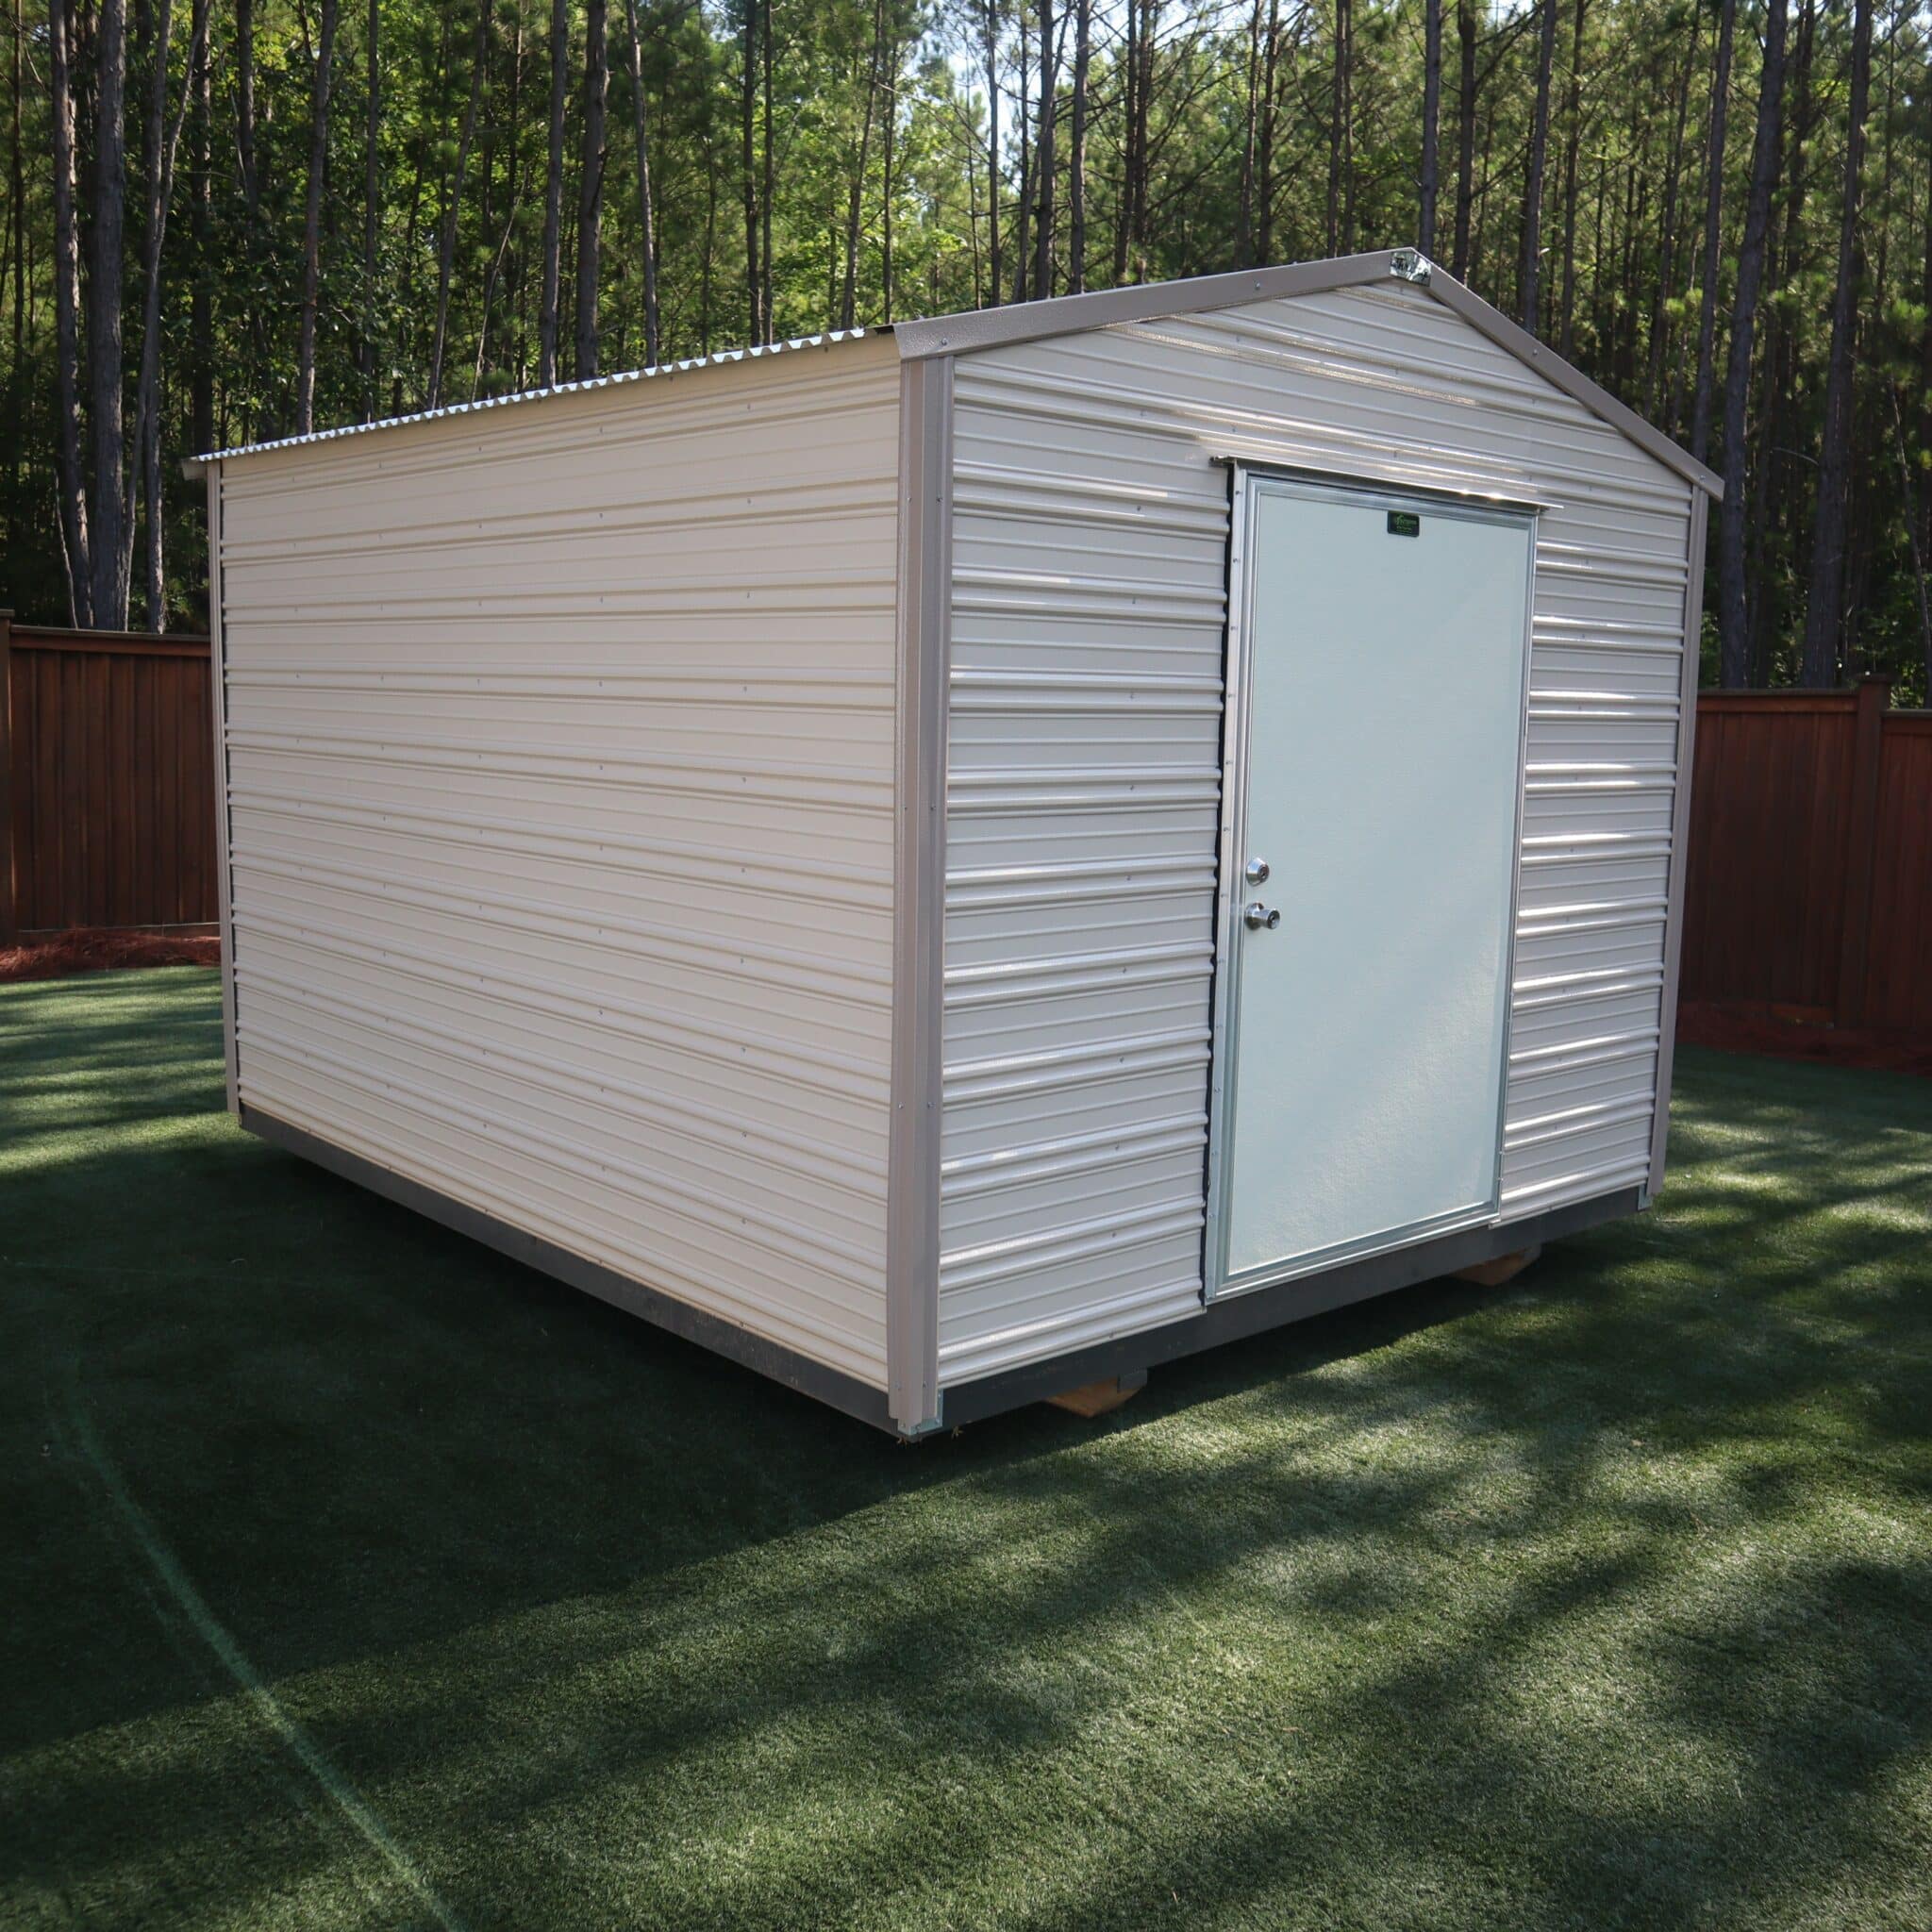 OutdoorOptions Eatonton Georgia 31024 Shed Picture Replace 46 Storage For Your Life Outdoor Options